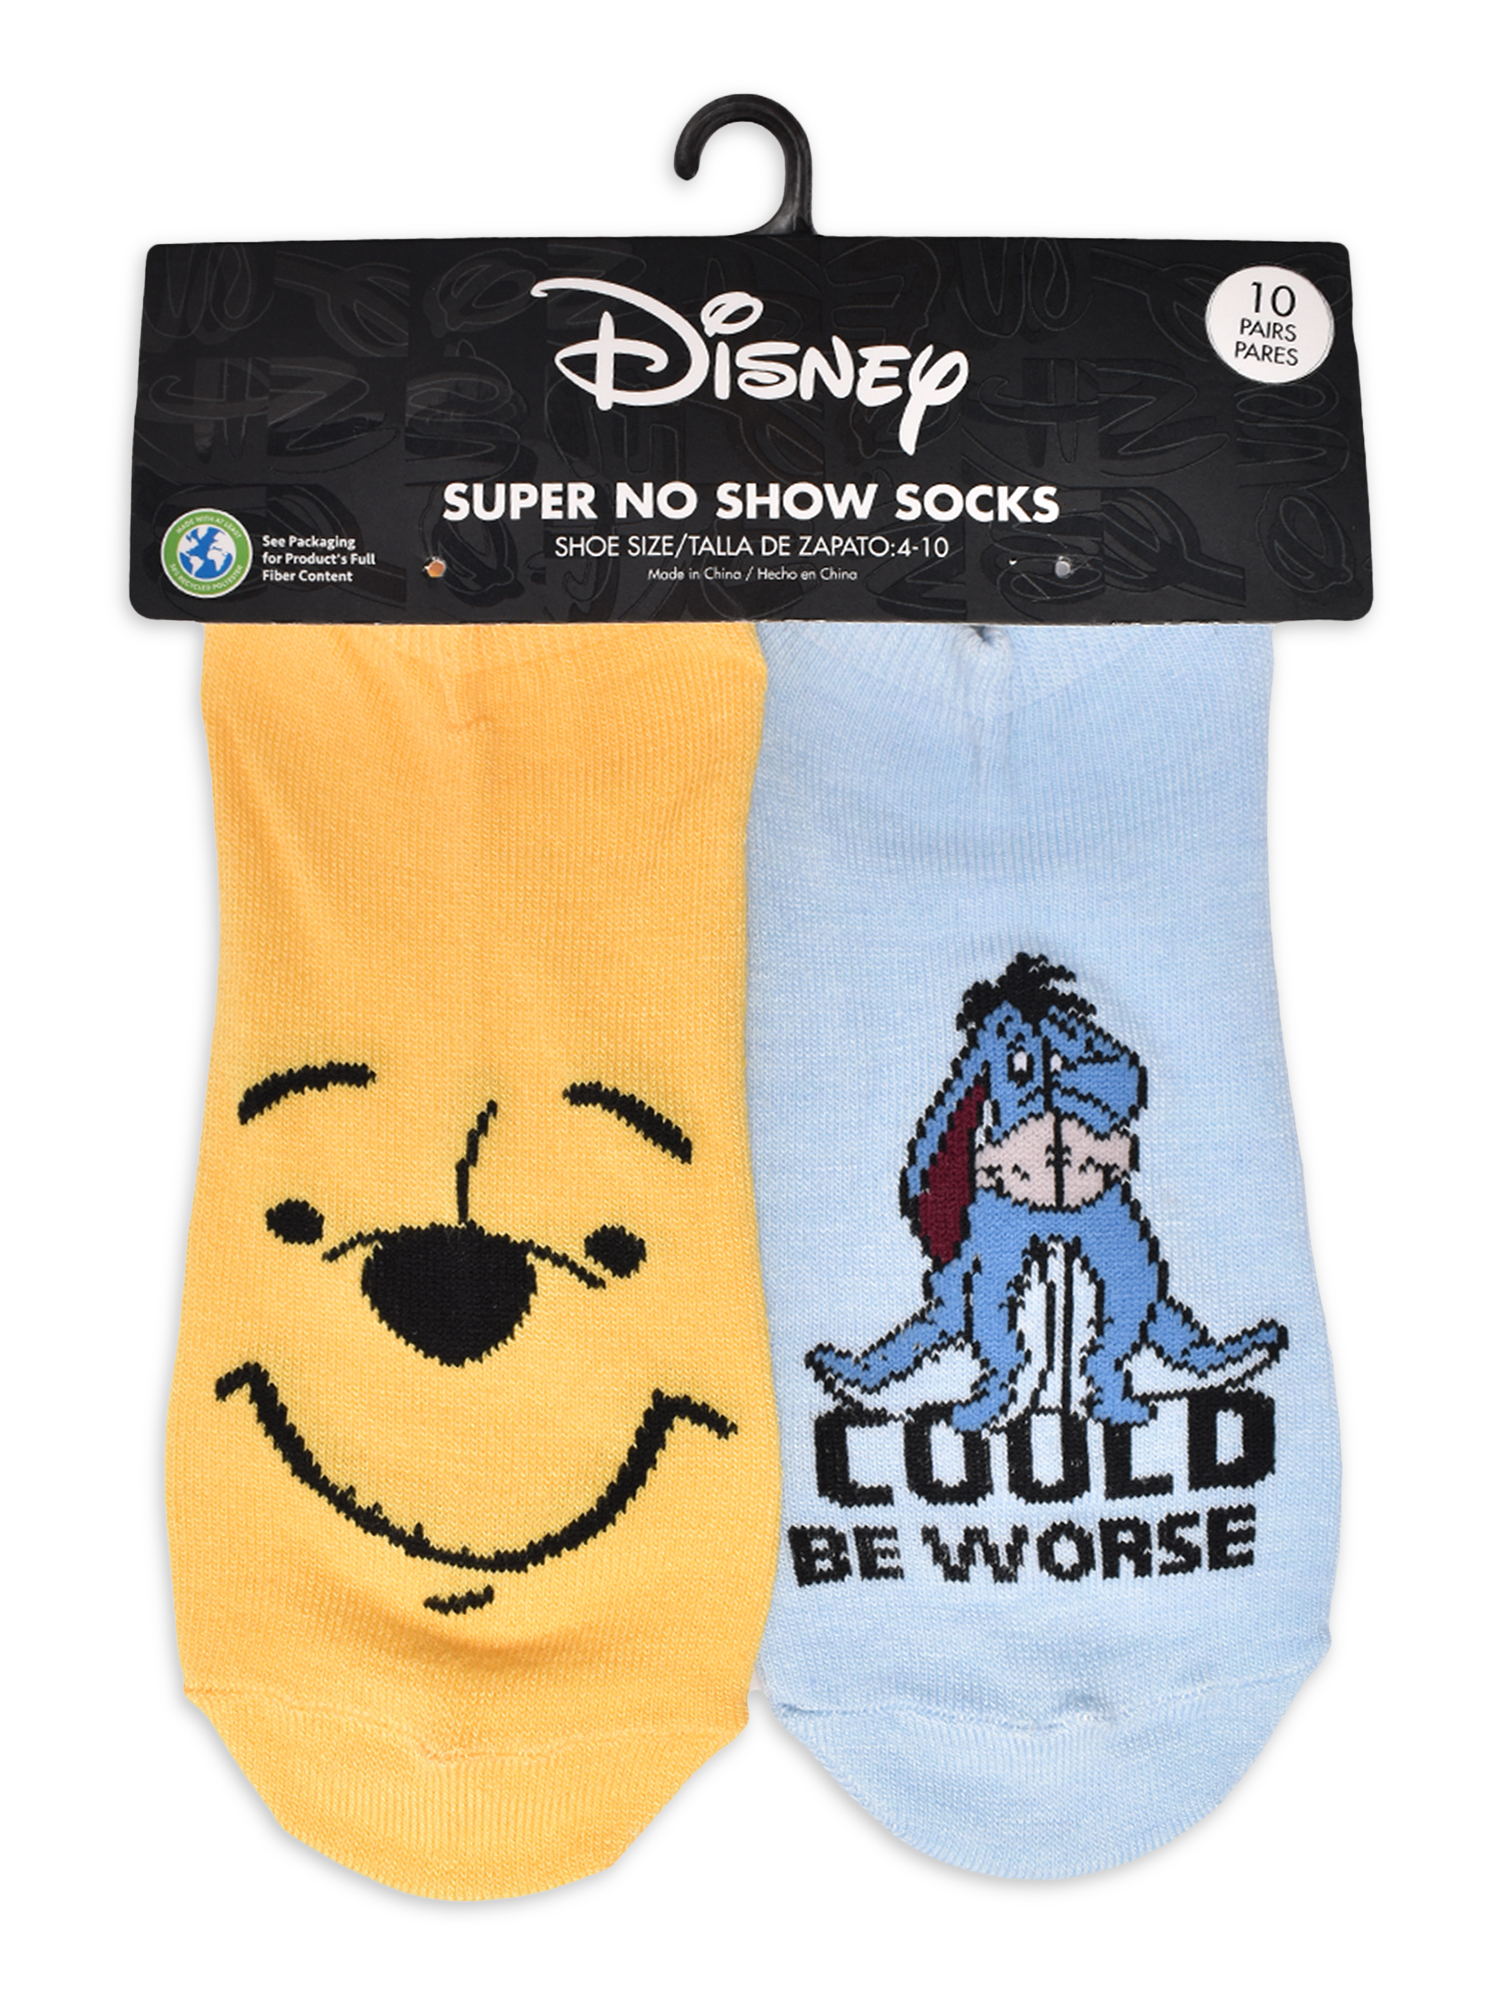 Disney Womens Winnie the Pooh Graphic Super No Show Socks, 10-Pack, Sizes 4-10 - image 2 of 5